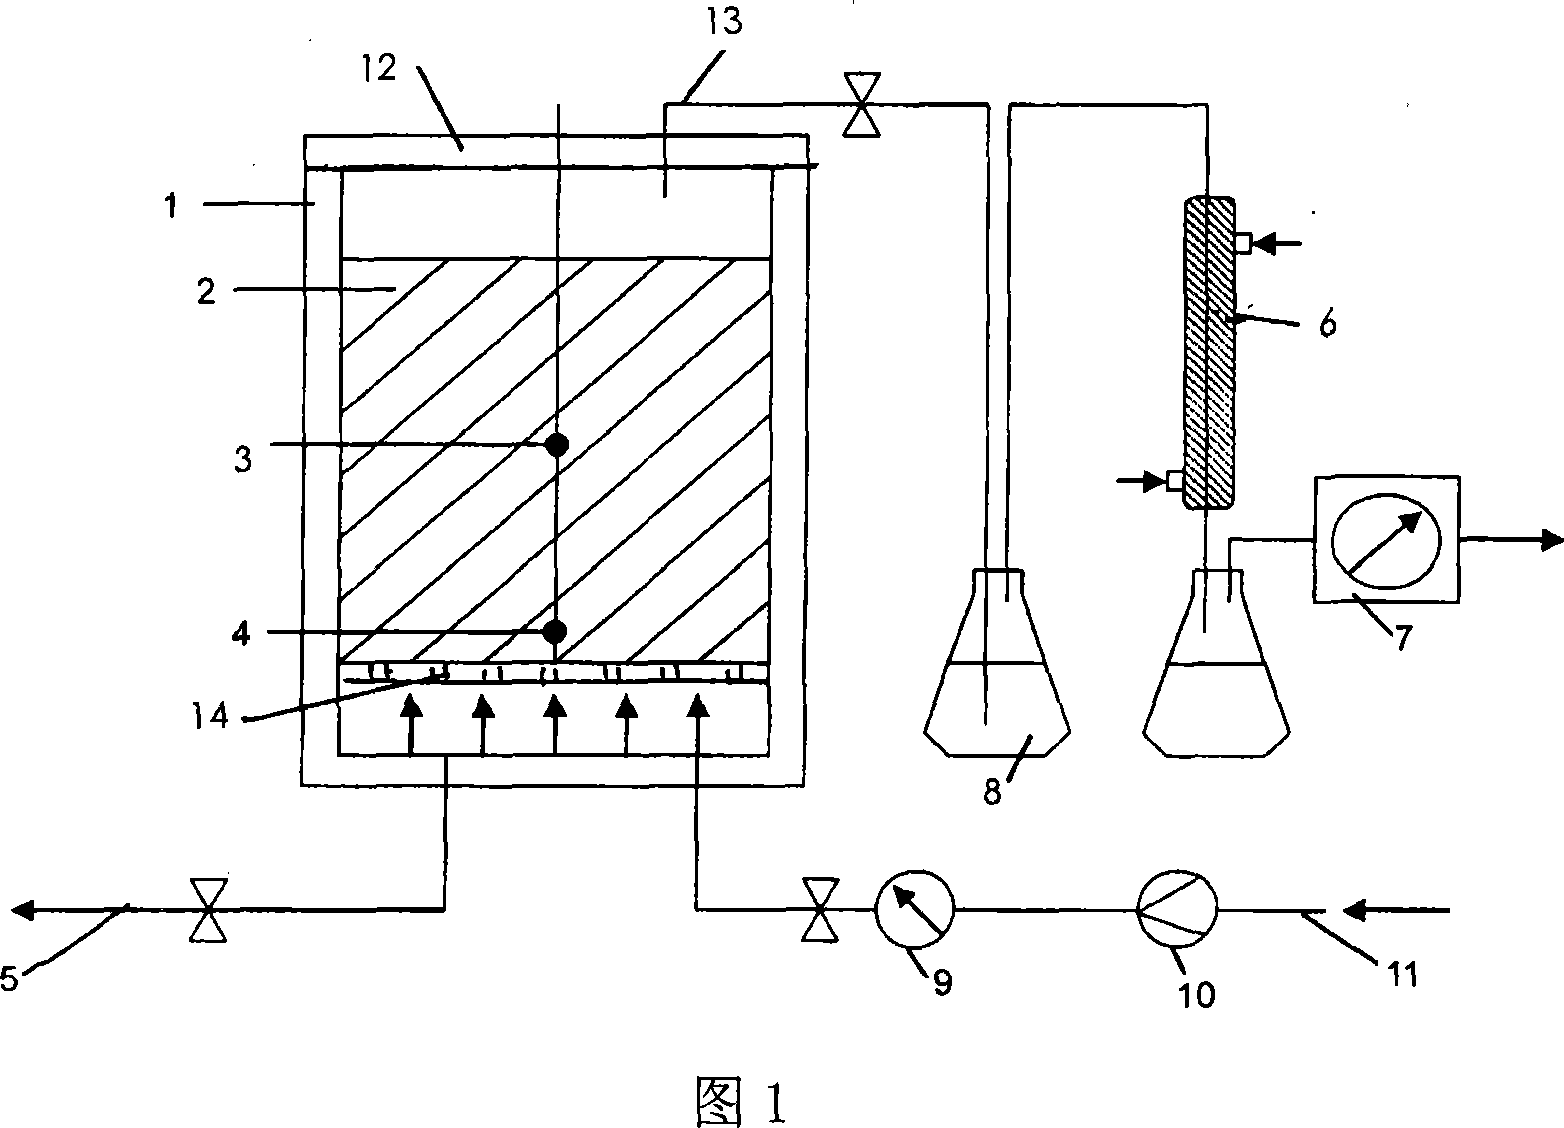 Method and device for fast composting kitchen residual by catalytic decomposing agent